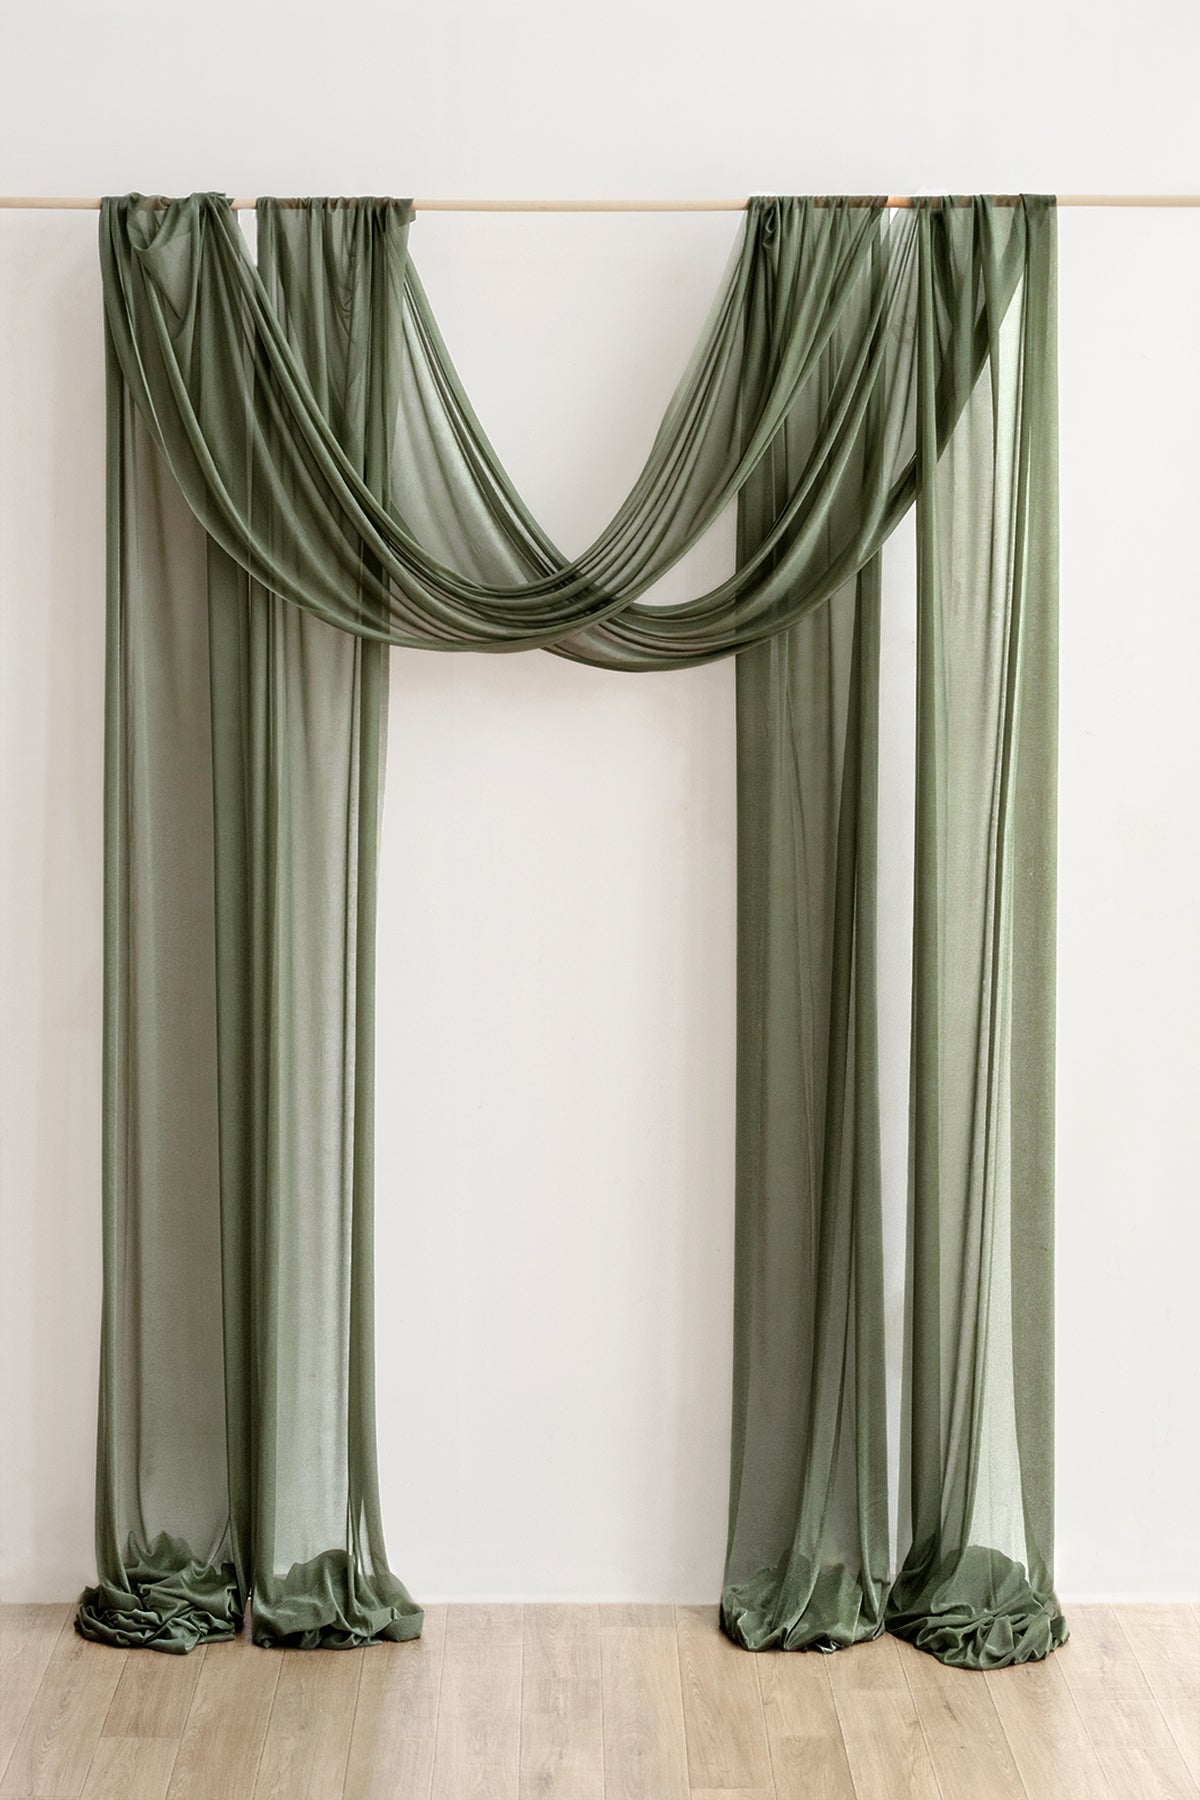 2 Panels Wedding Arch Drapes 10m in Emerald & Tawny Beige | Clearance